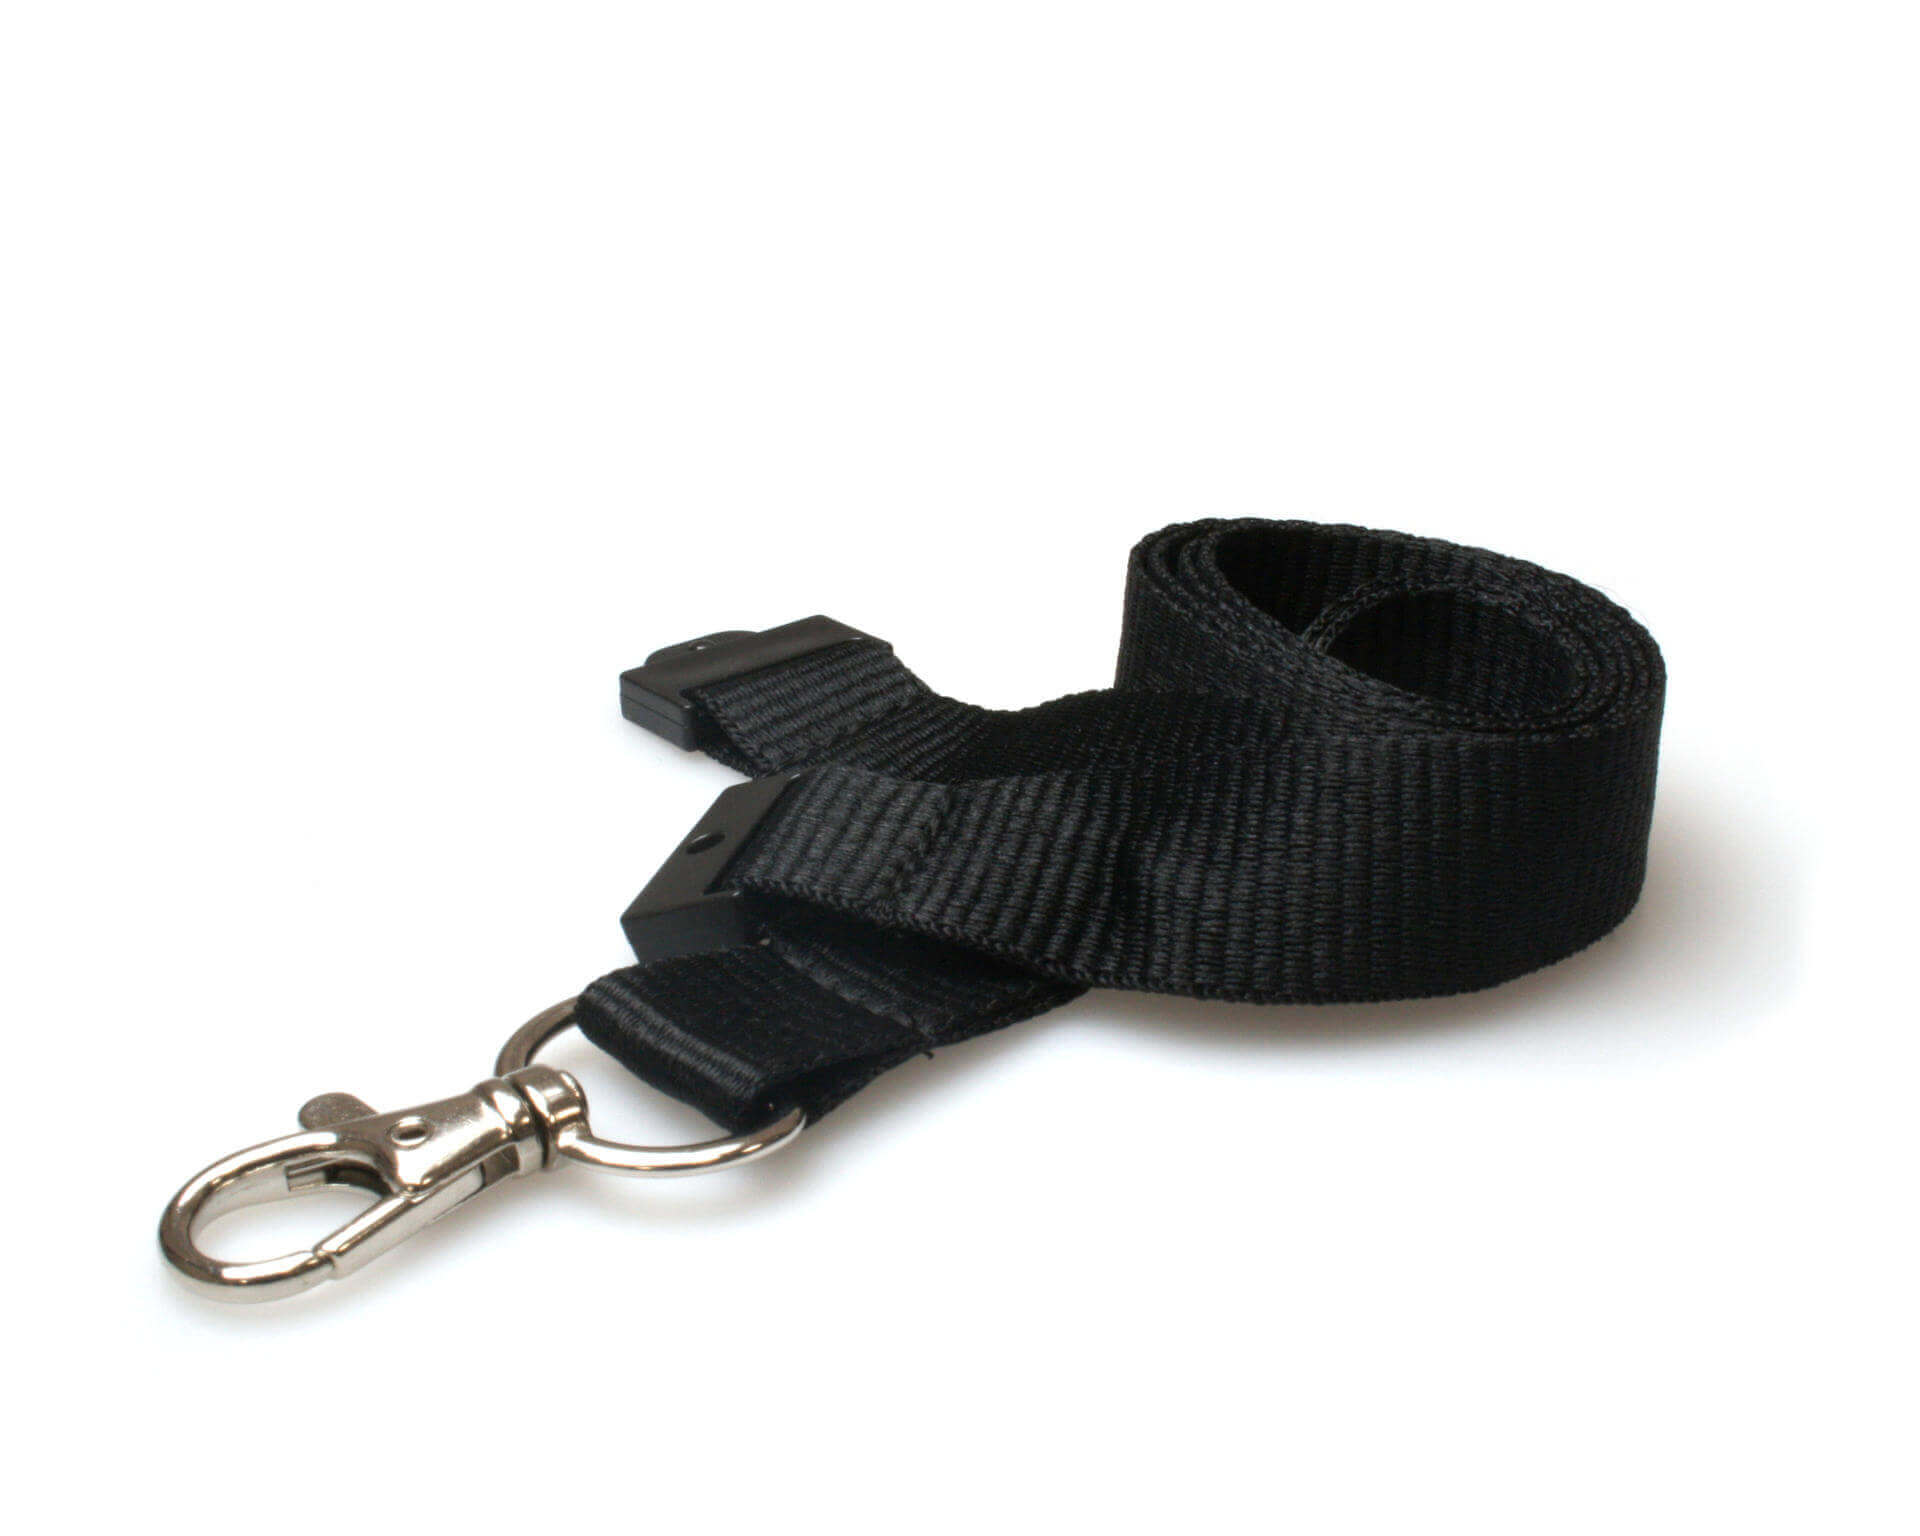 20mm Black Lanyards (100 Pack) - Trigger Clip and Safety Breakaway